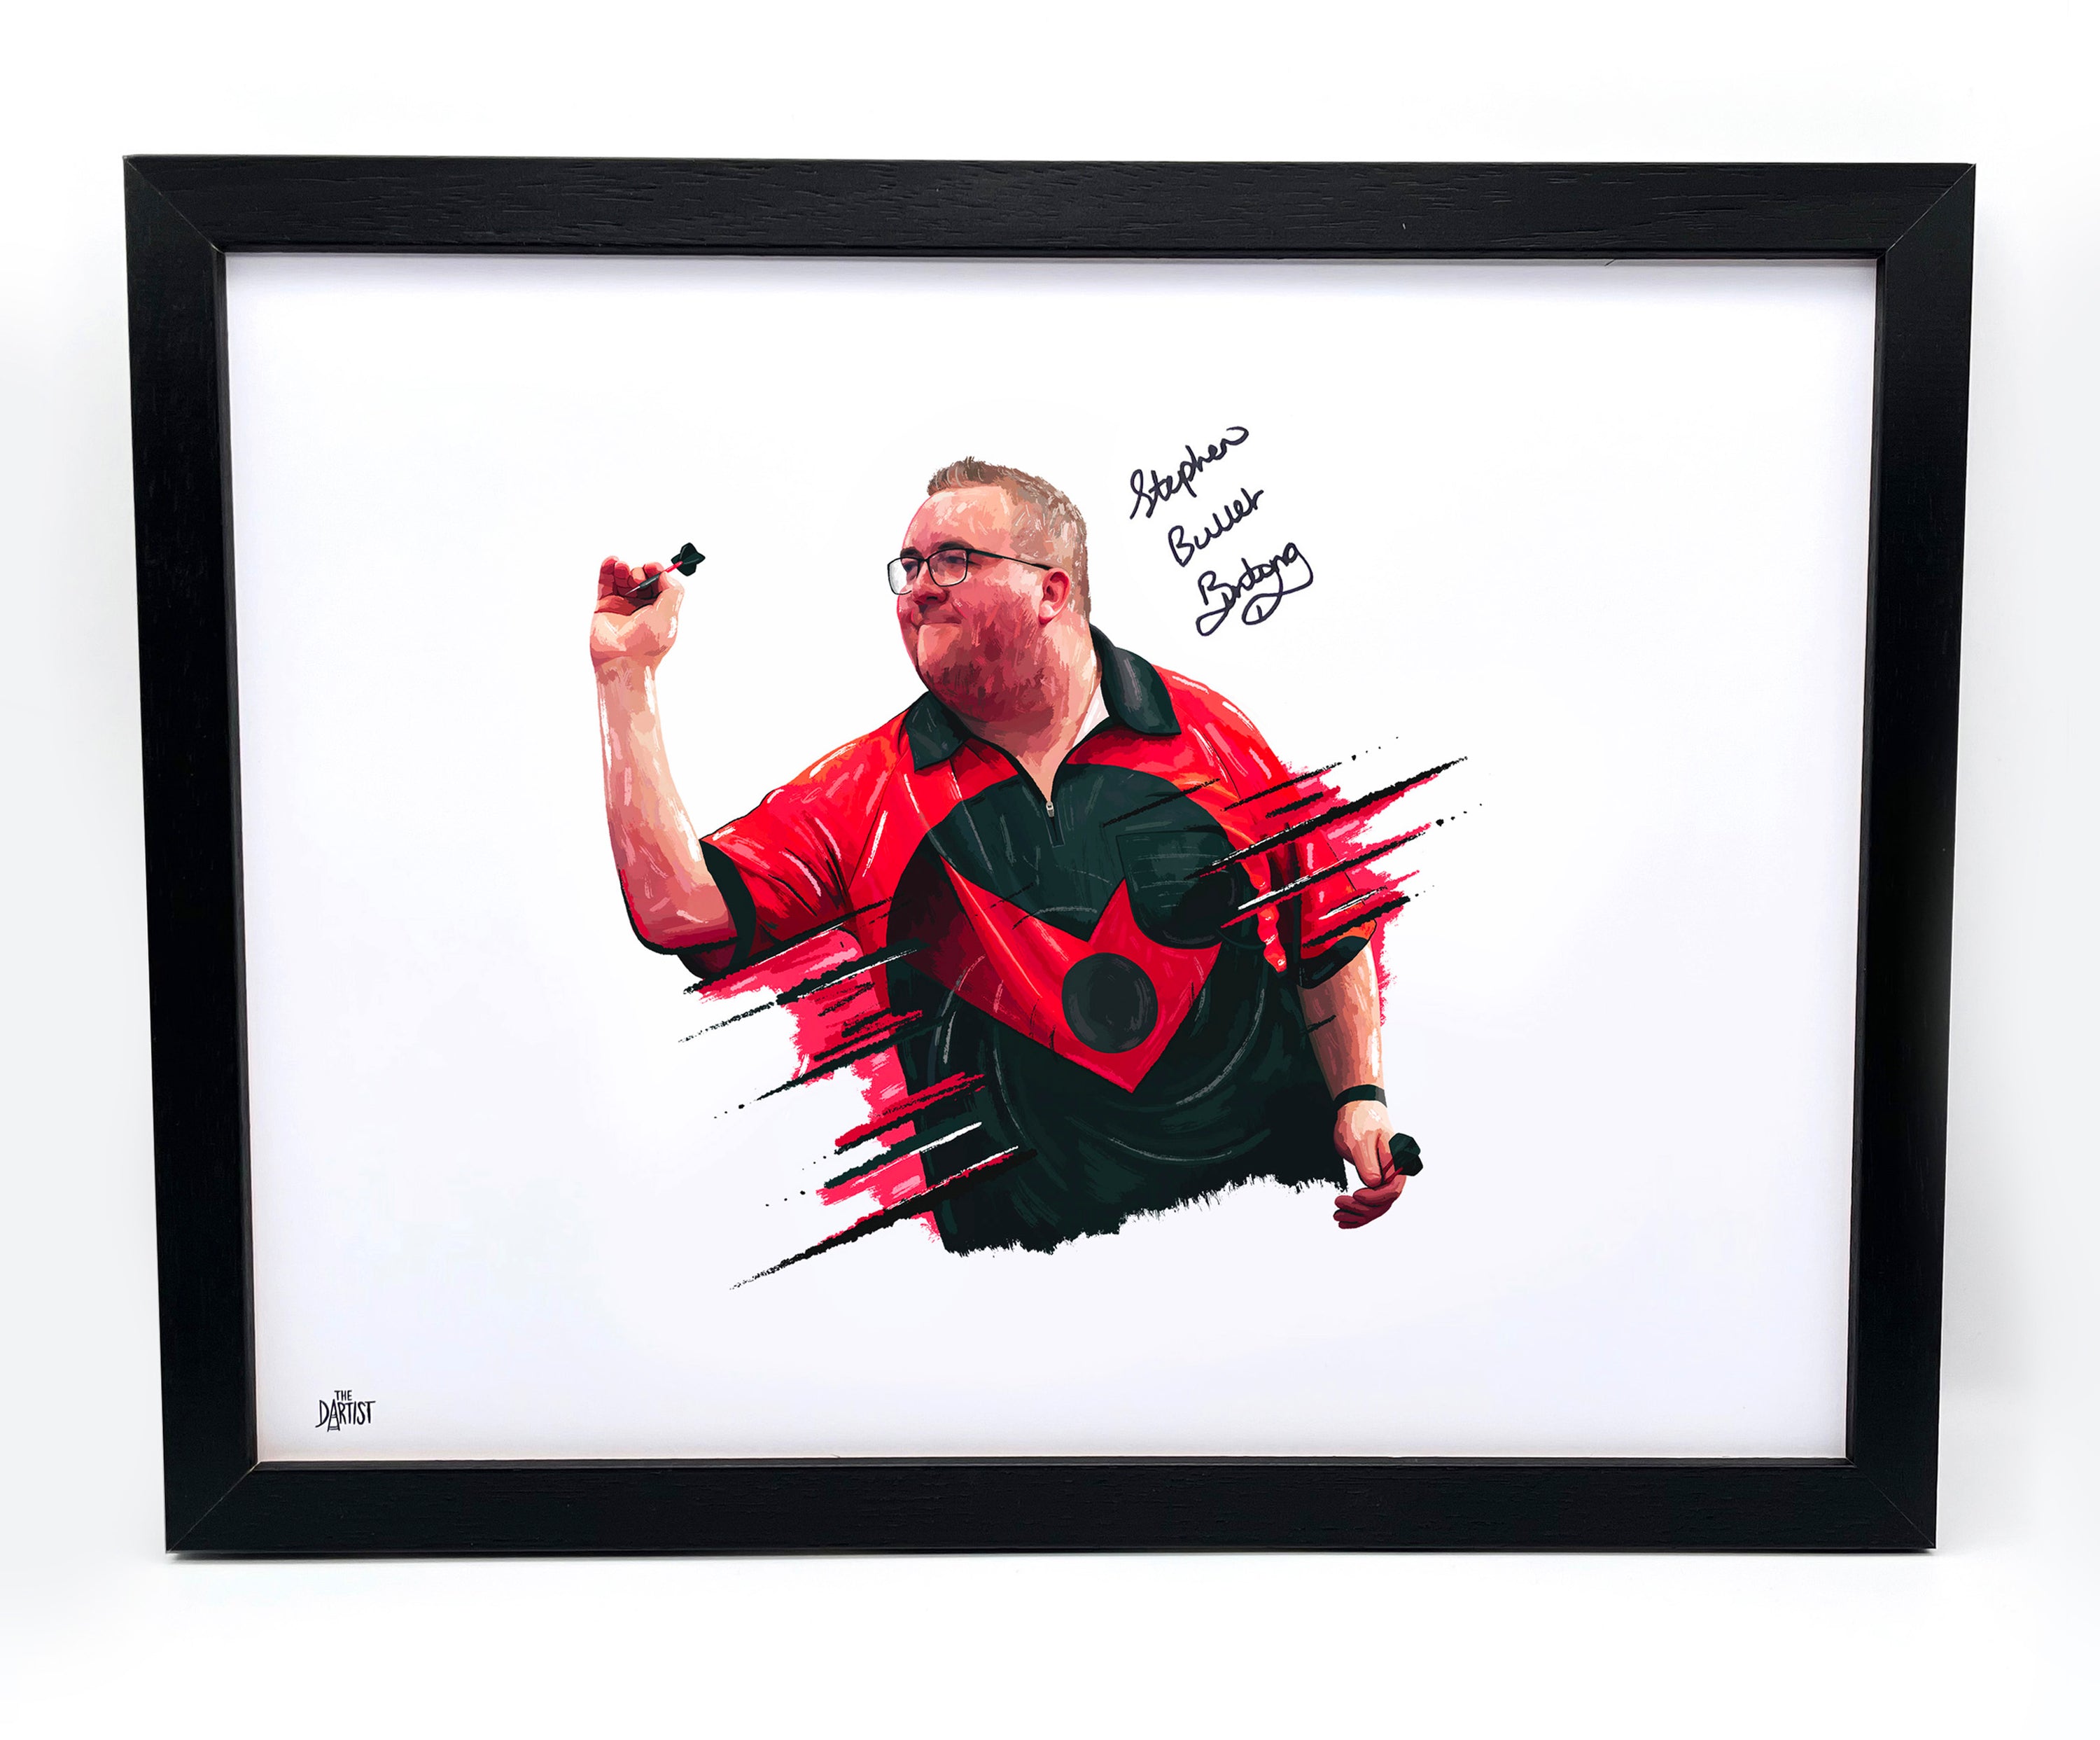 Stephen Bunting Limited Edition Signed Art Print - The Dartist